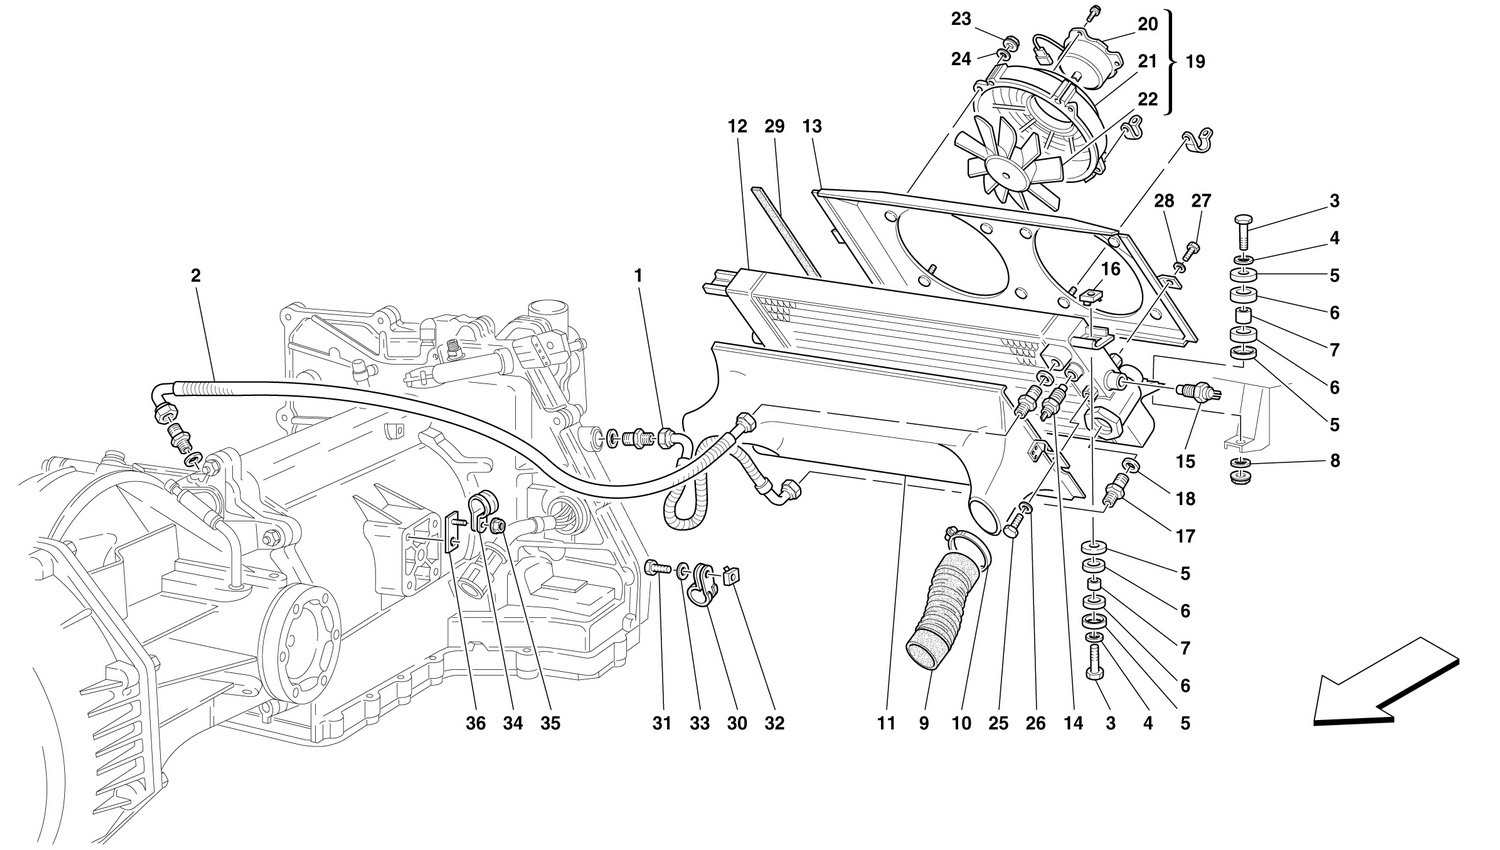 Schematic: Gearbox Cooling Radiator -Valid For 456 Gta